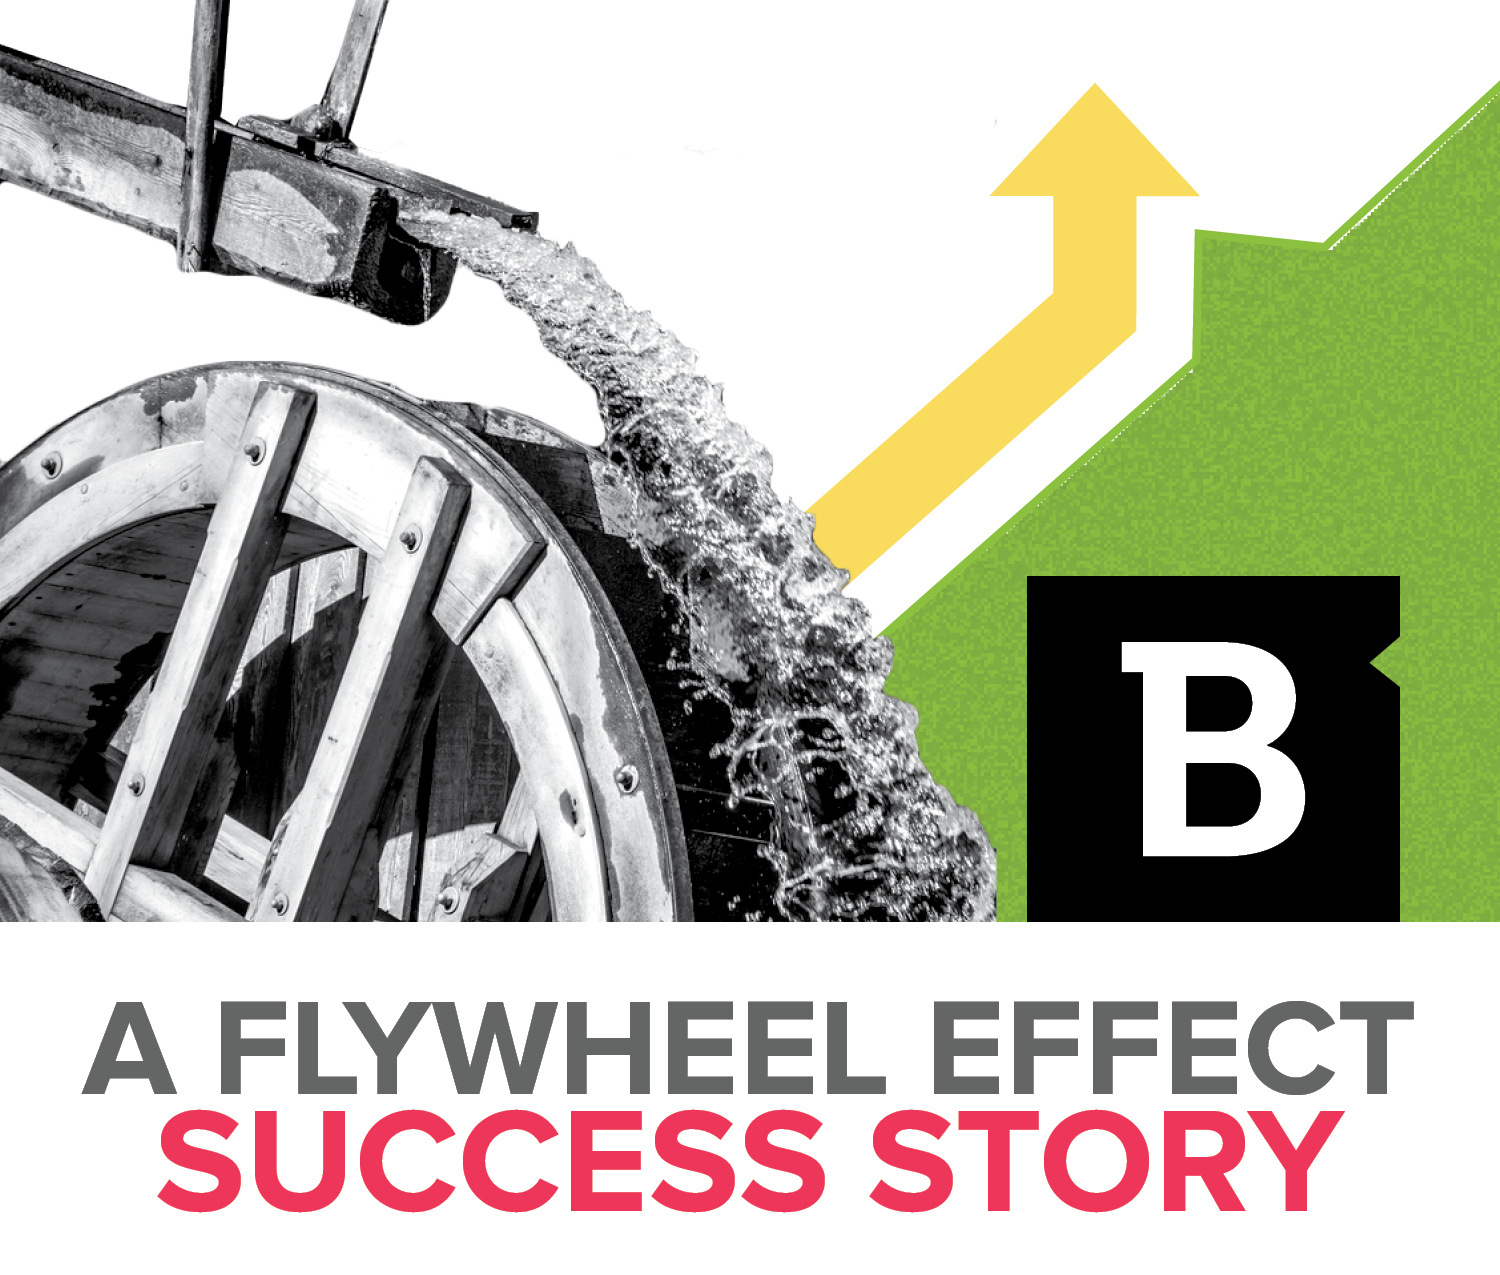 Content marketing and SEO are like a flywheel - they take effort to get started, but then gain a life of their own.